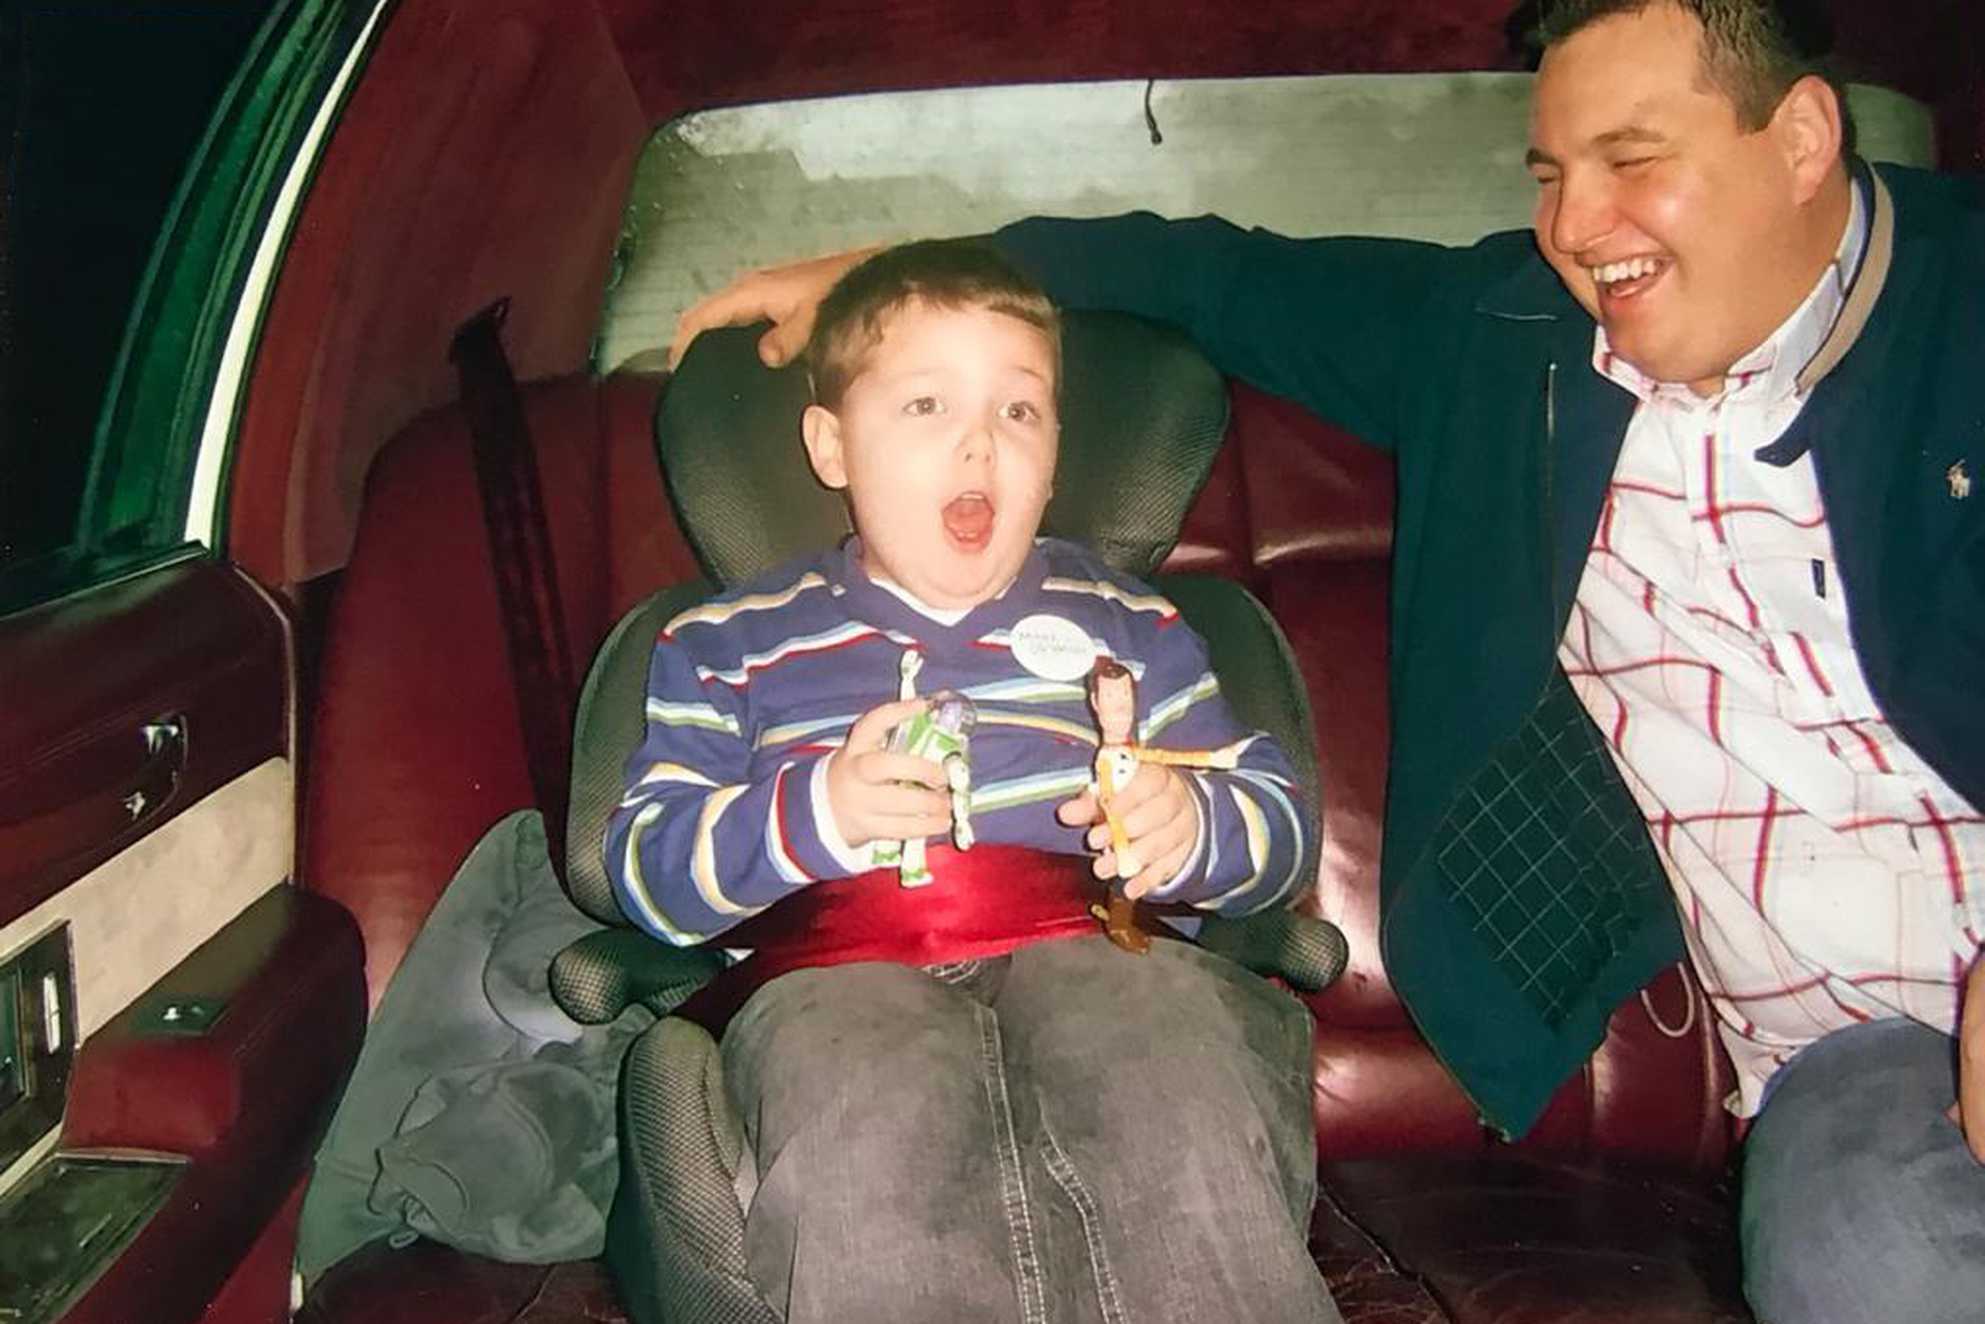 Jacob and his dad in the back of the limo on the way to his wish.